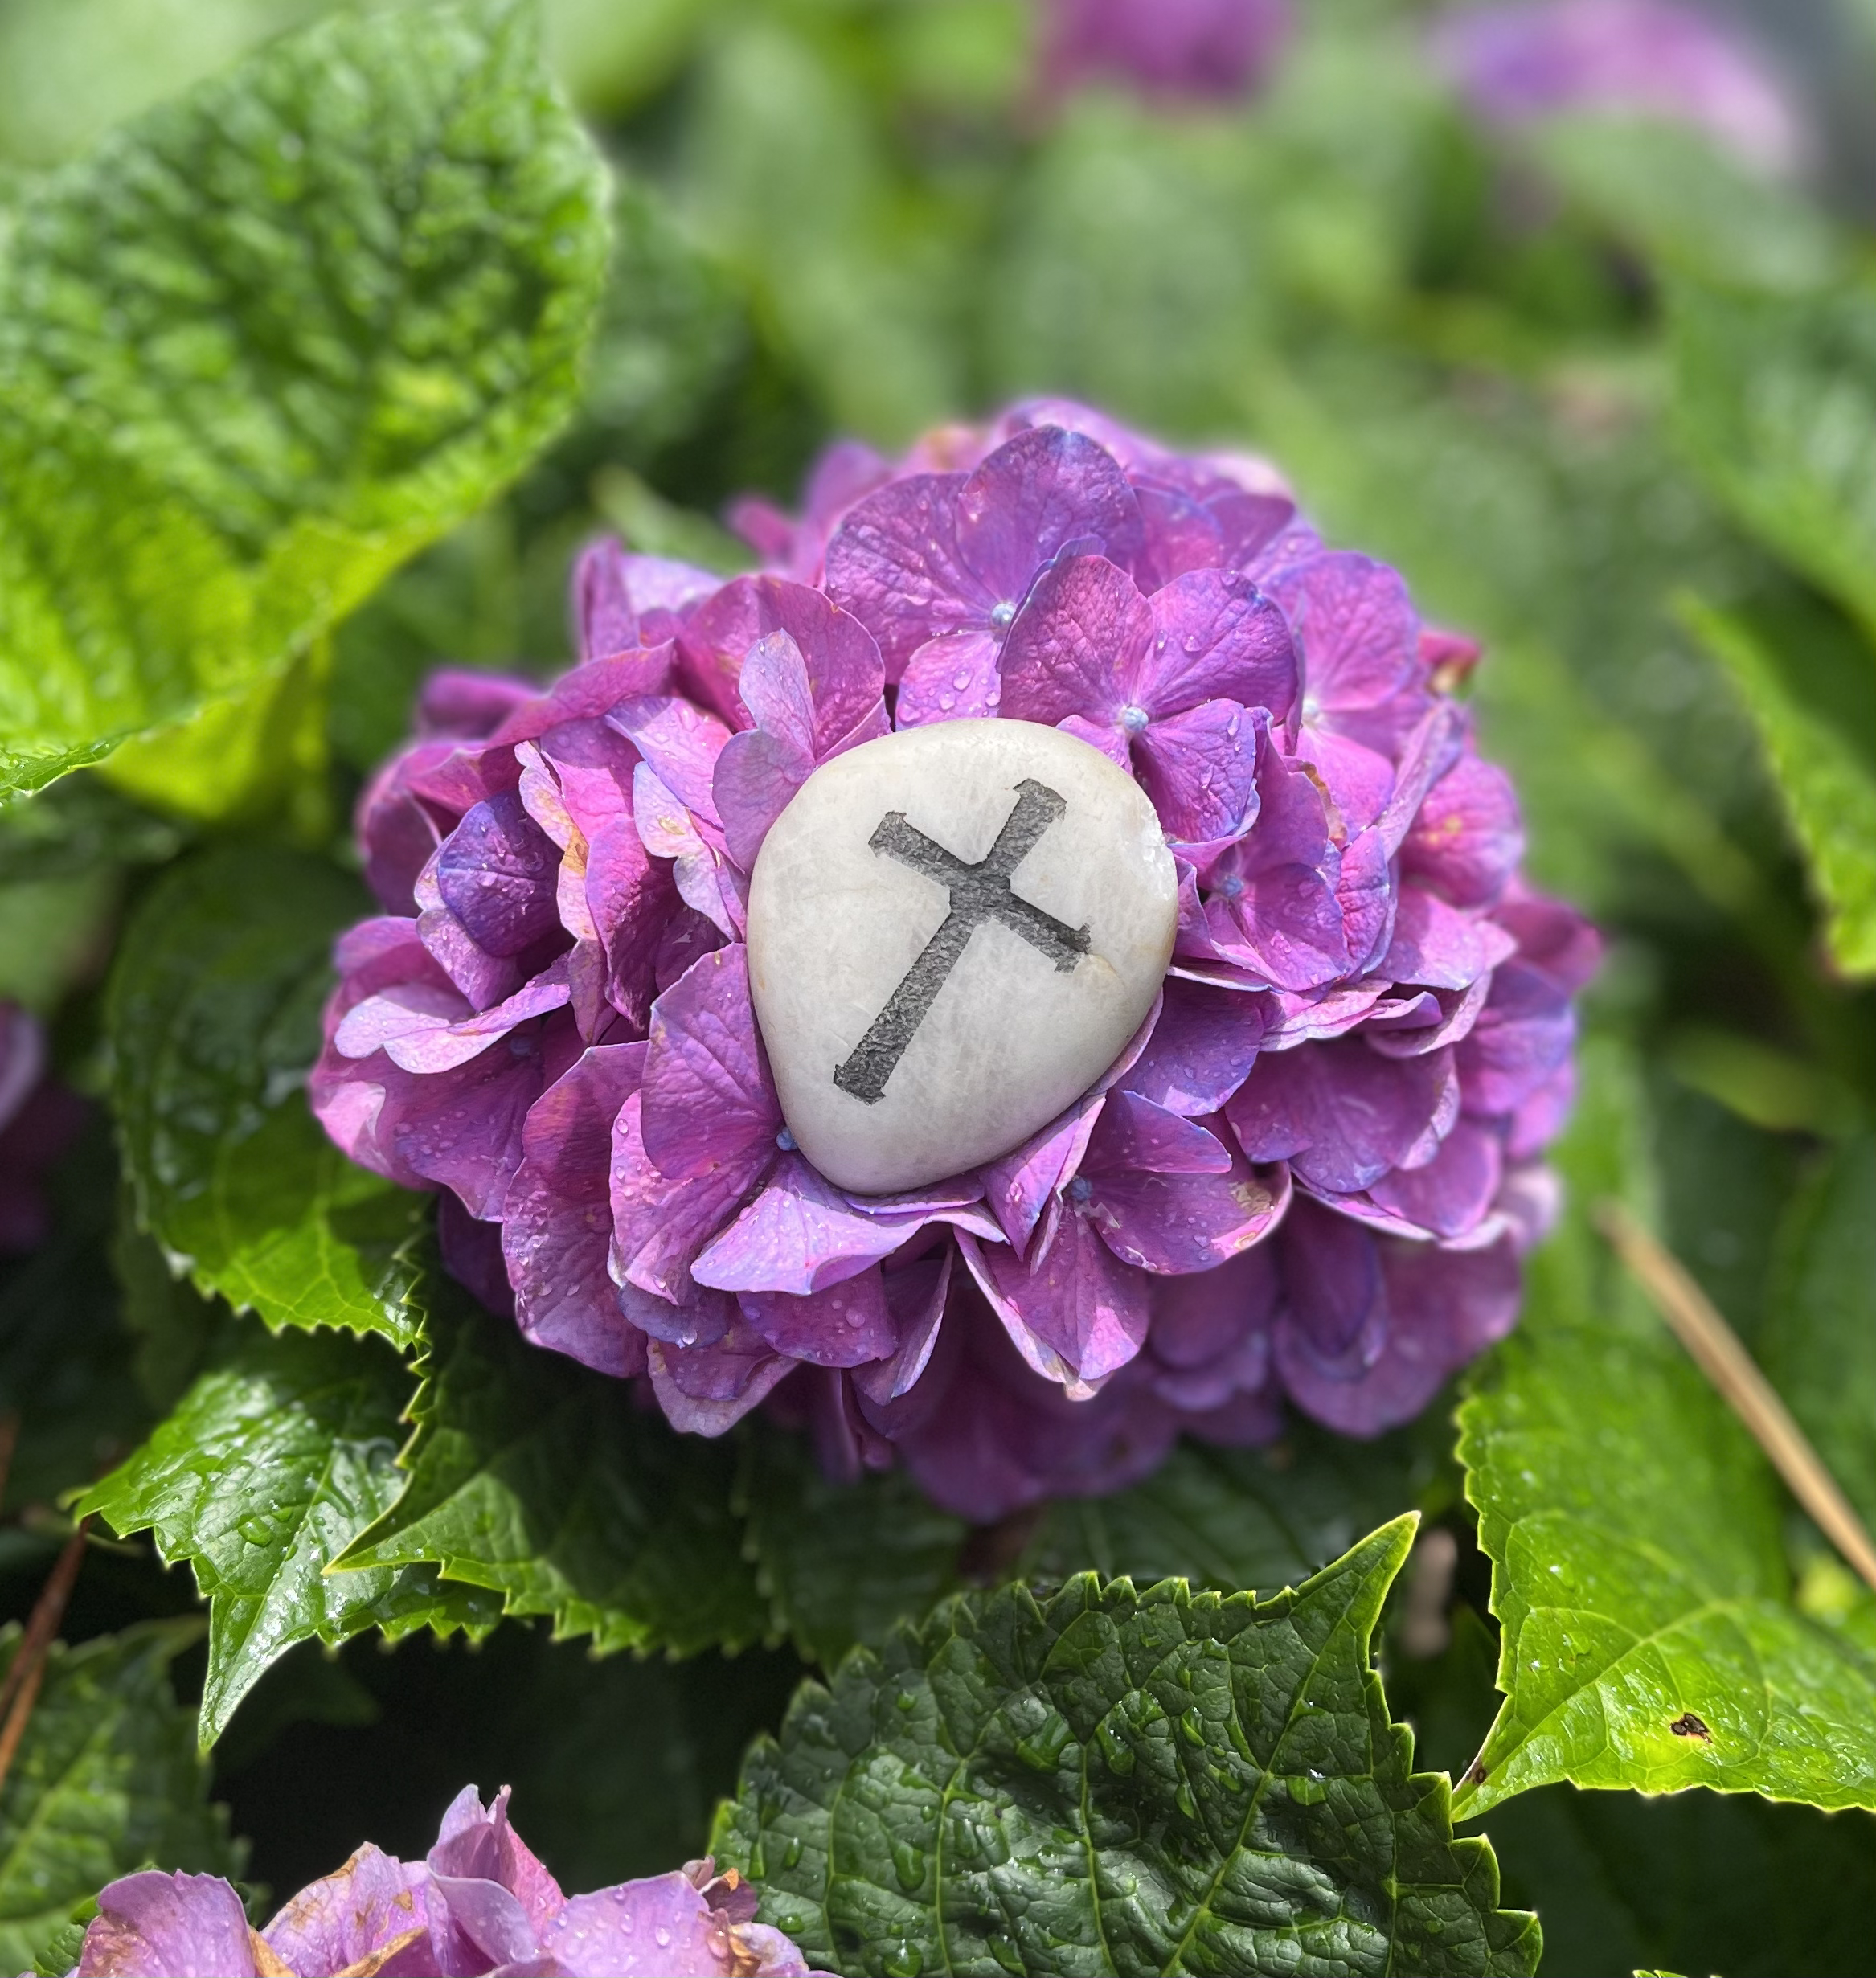 Stone with a cross